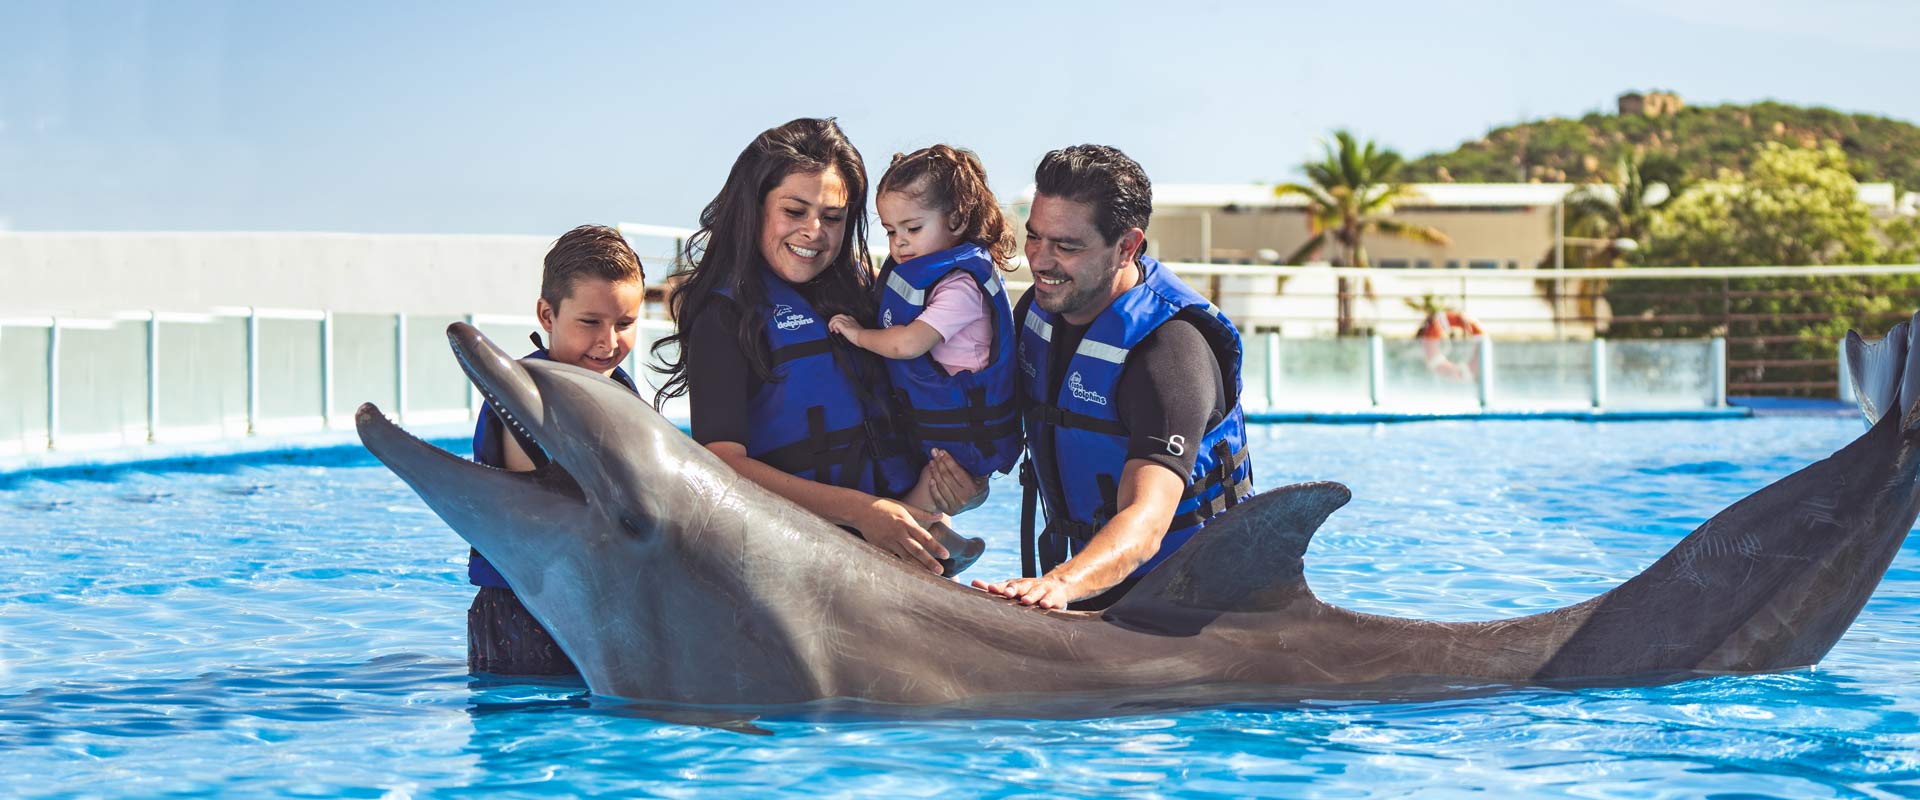 swim with dolphins with your family